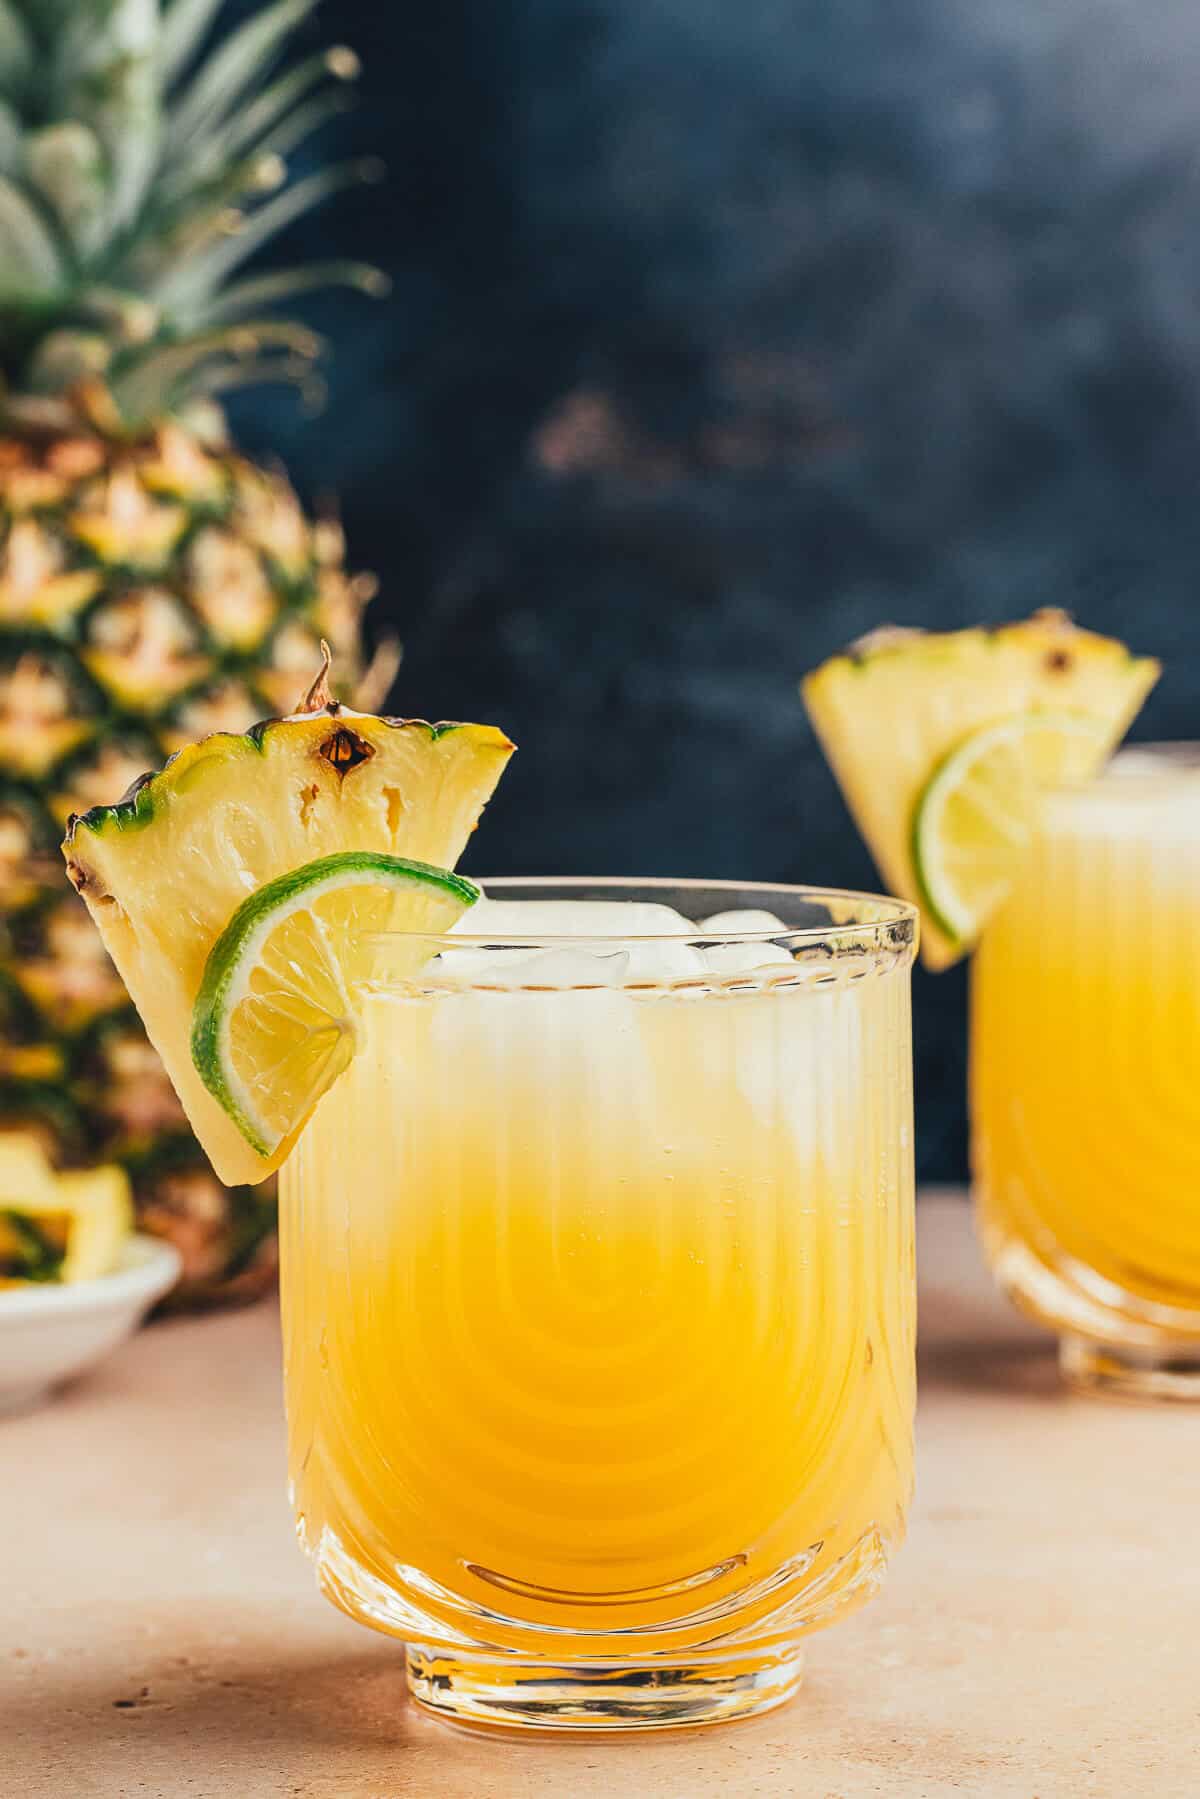 A glass of refreshing pineapple ginger beer mocktail garnished with a pineapple wedge and slice of lime. Another drink and a pineapple are in the background.